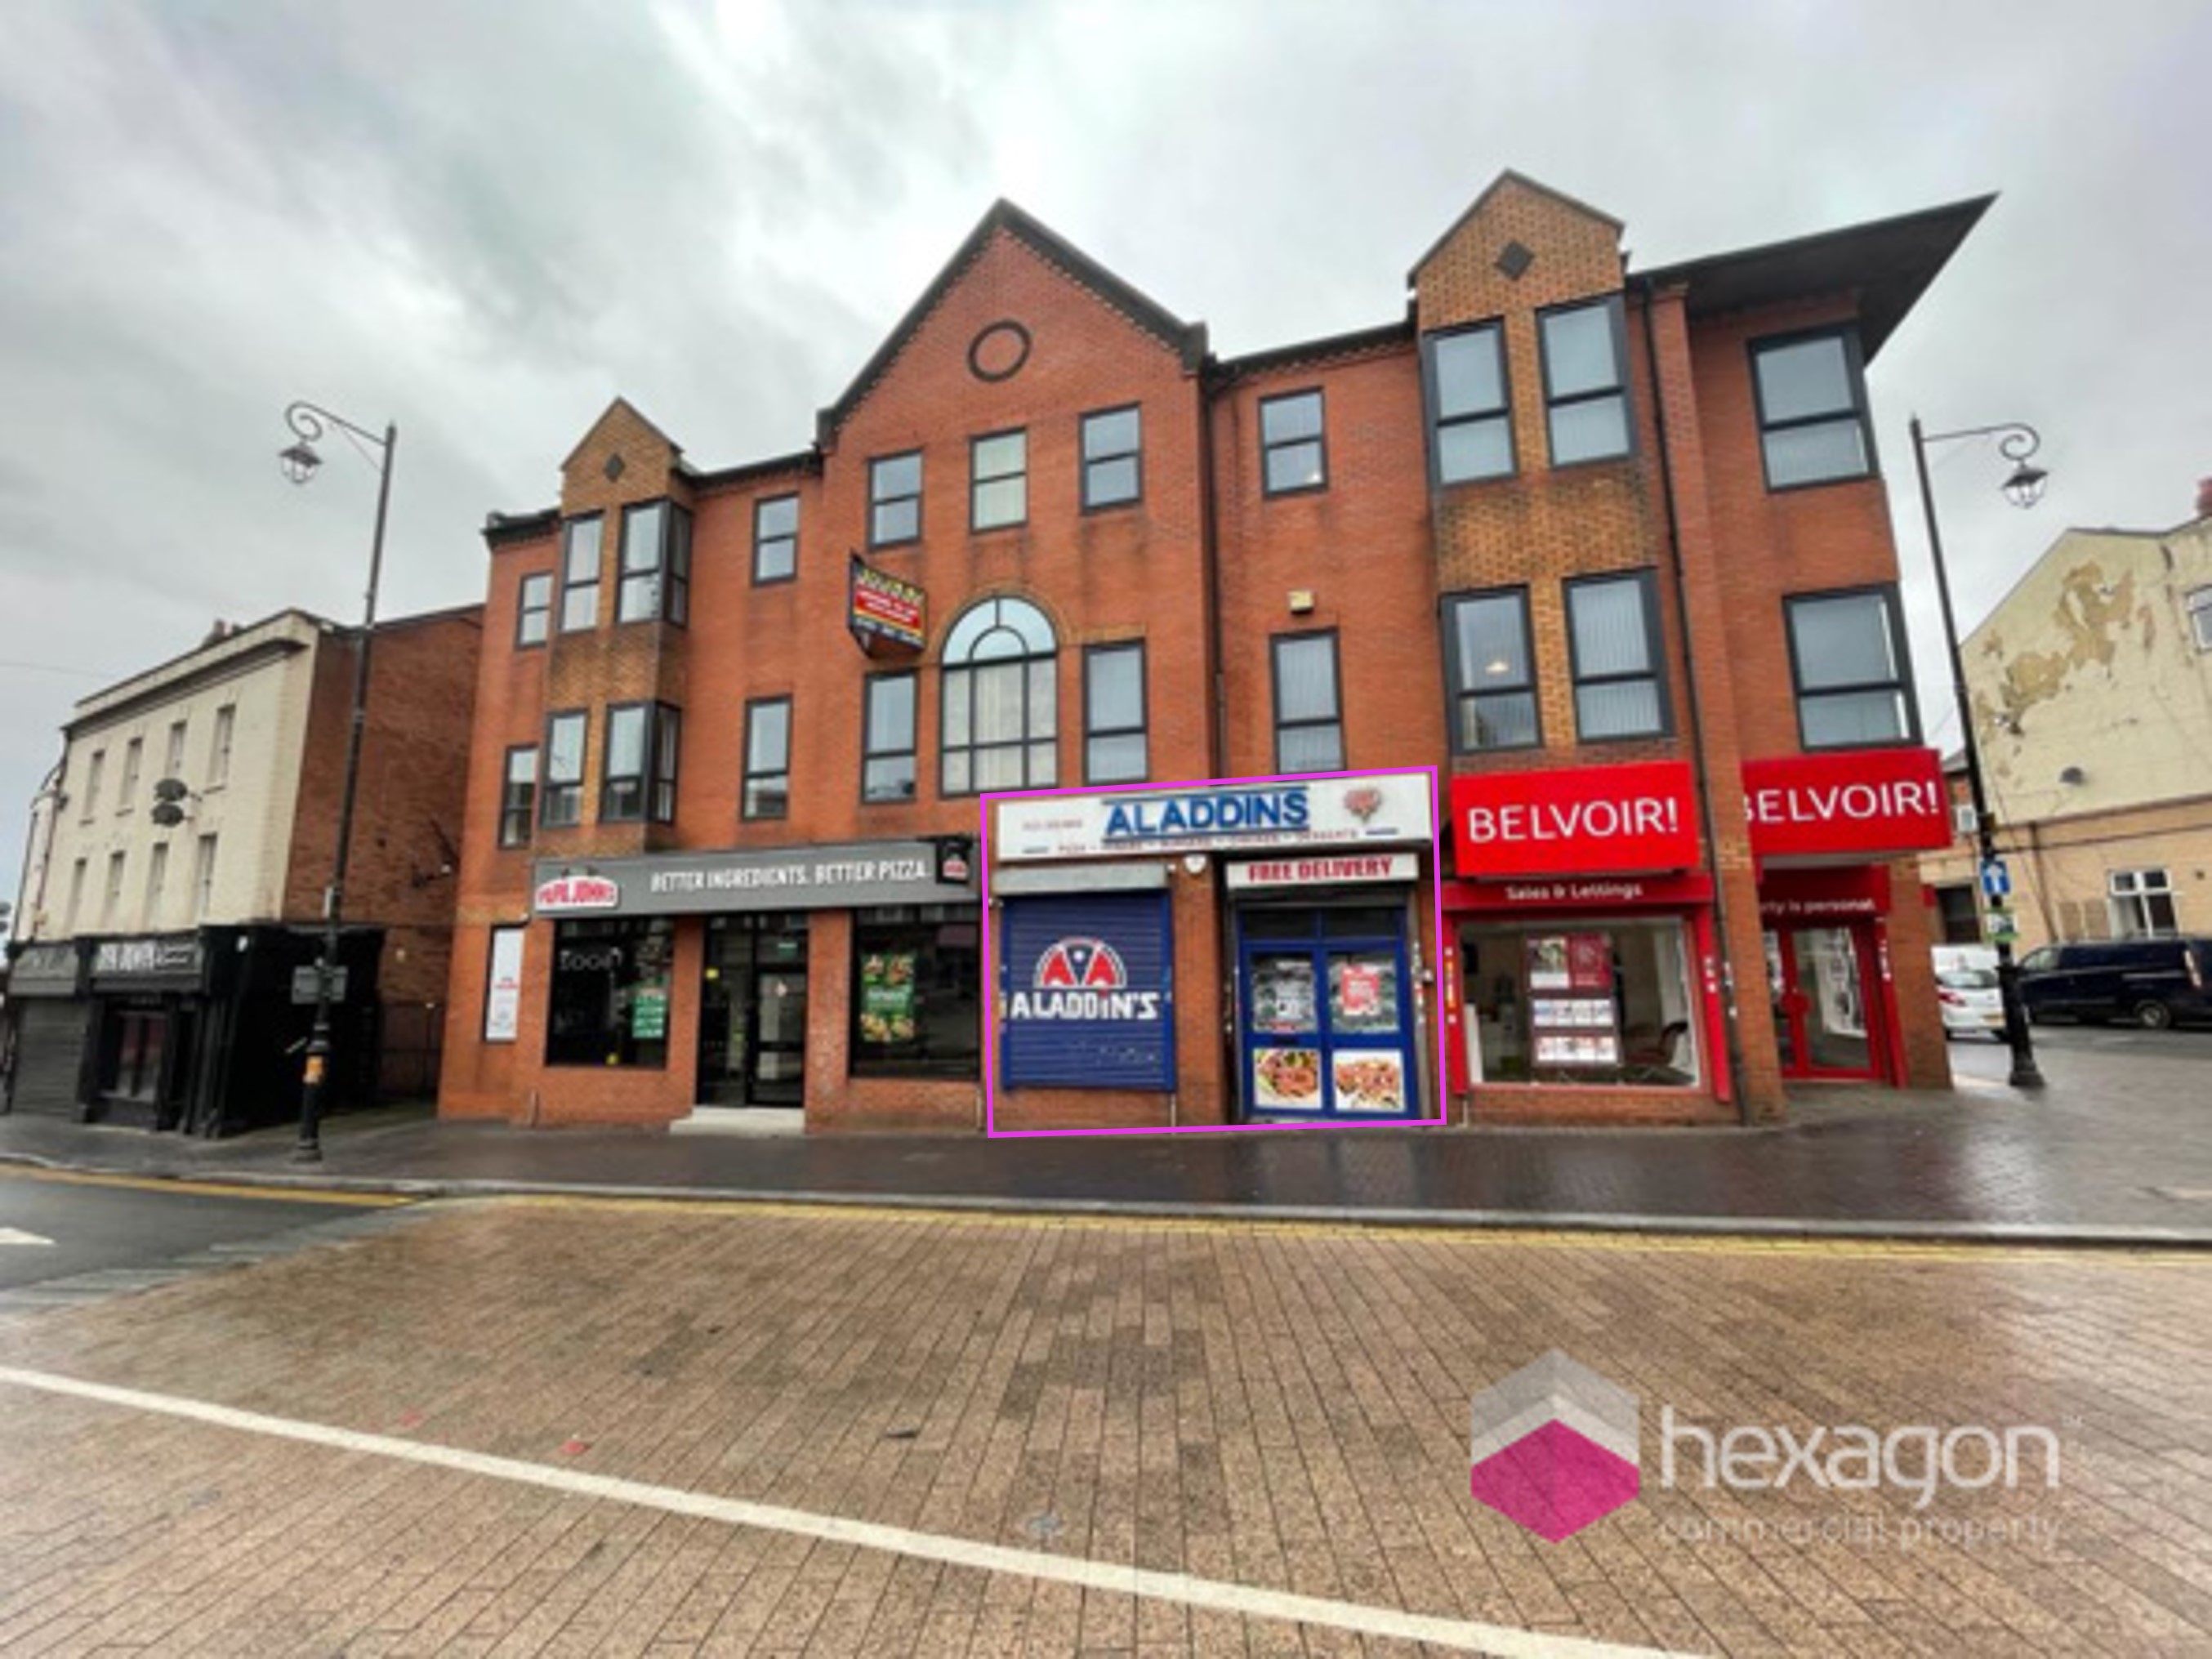 Retail Property (High Street) for rent in Wednesbury. From Hexagon Commercial Property